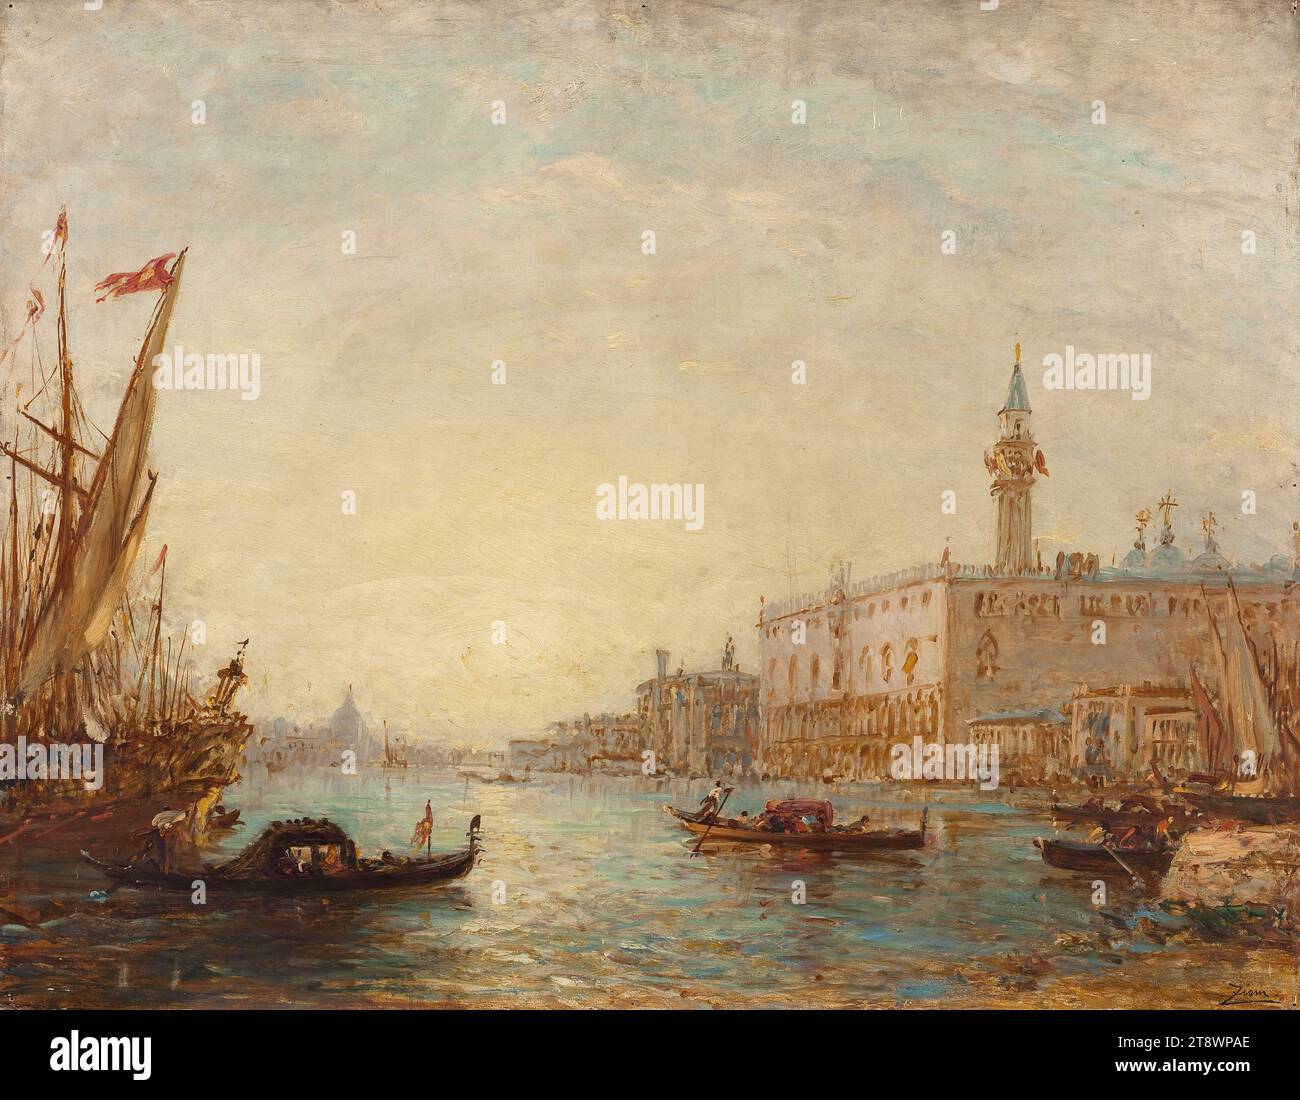 Venice Italy, Doge's Palace, Ziem, Felix, Painter, Between 1870 and 1890, 2nd half of the 19th century, Painting, Oil painting, Wood, Height: 71.5 cm, Width: 92 cm Stock Photo